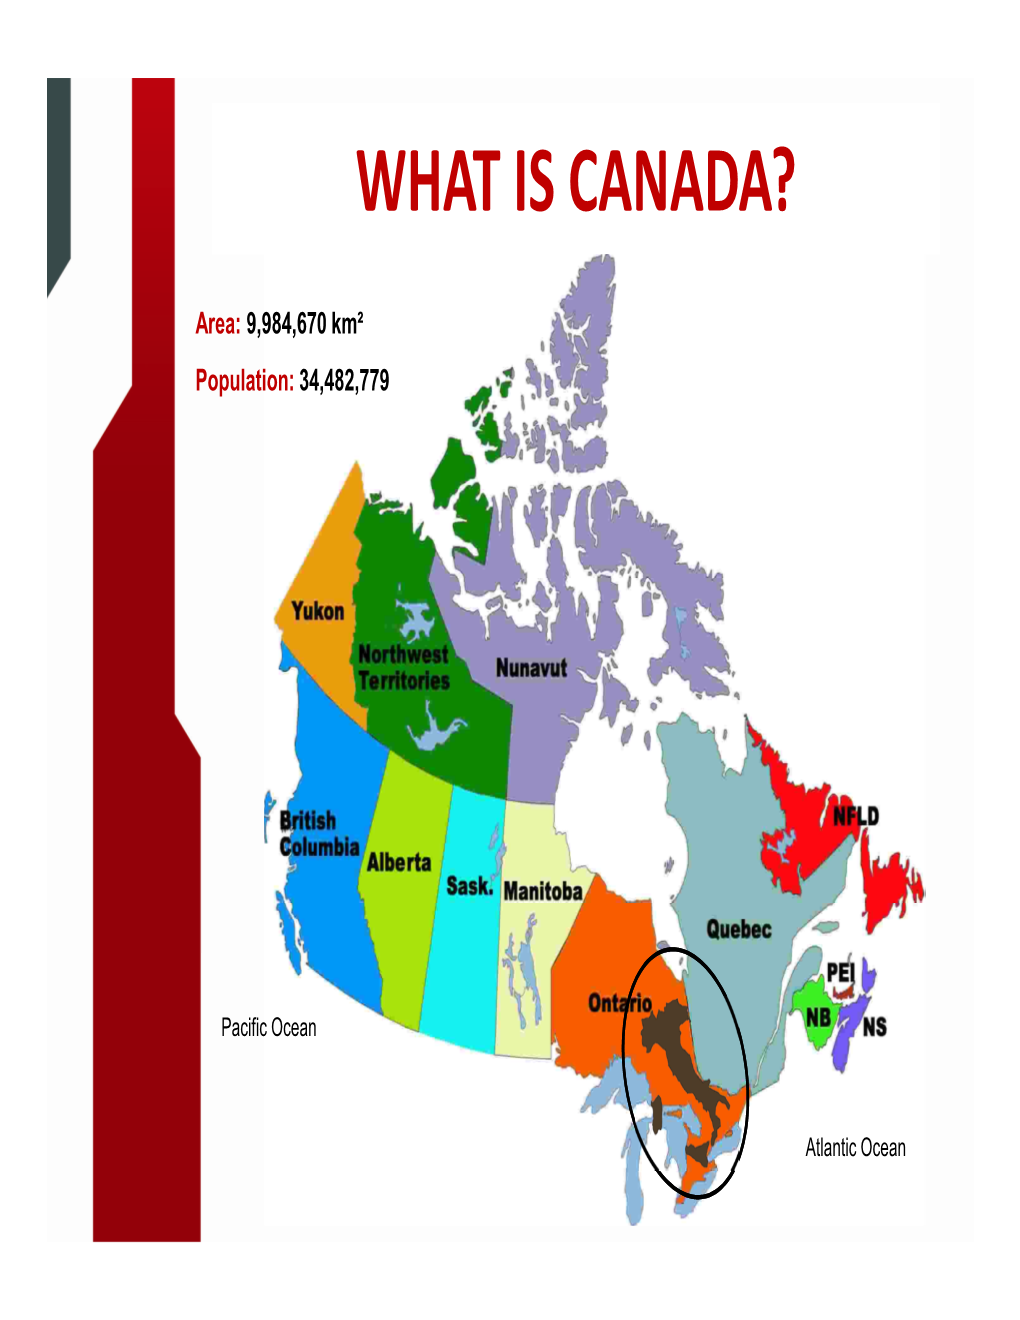 What Is Canada?